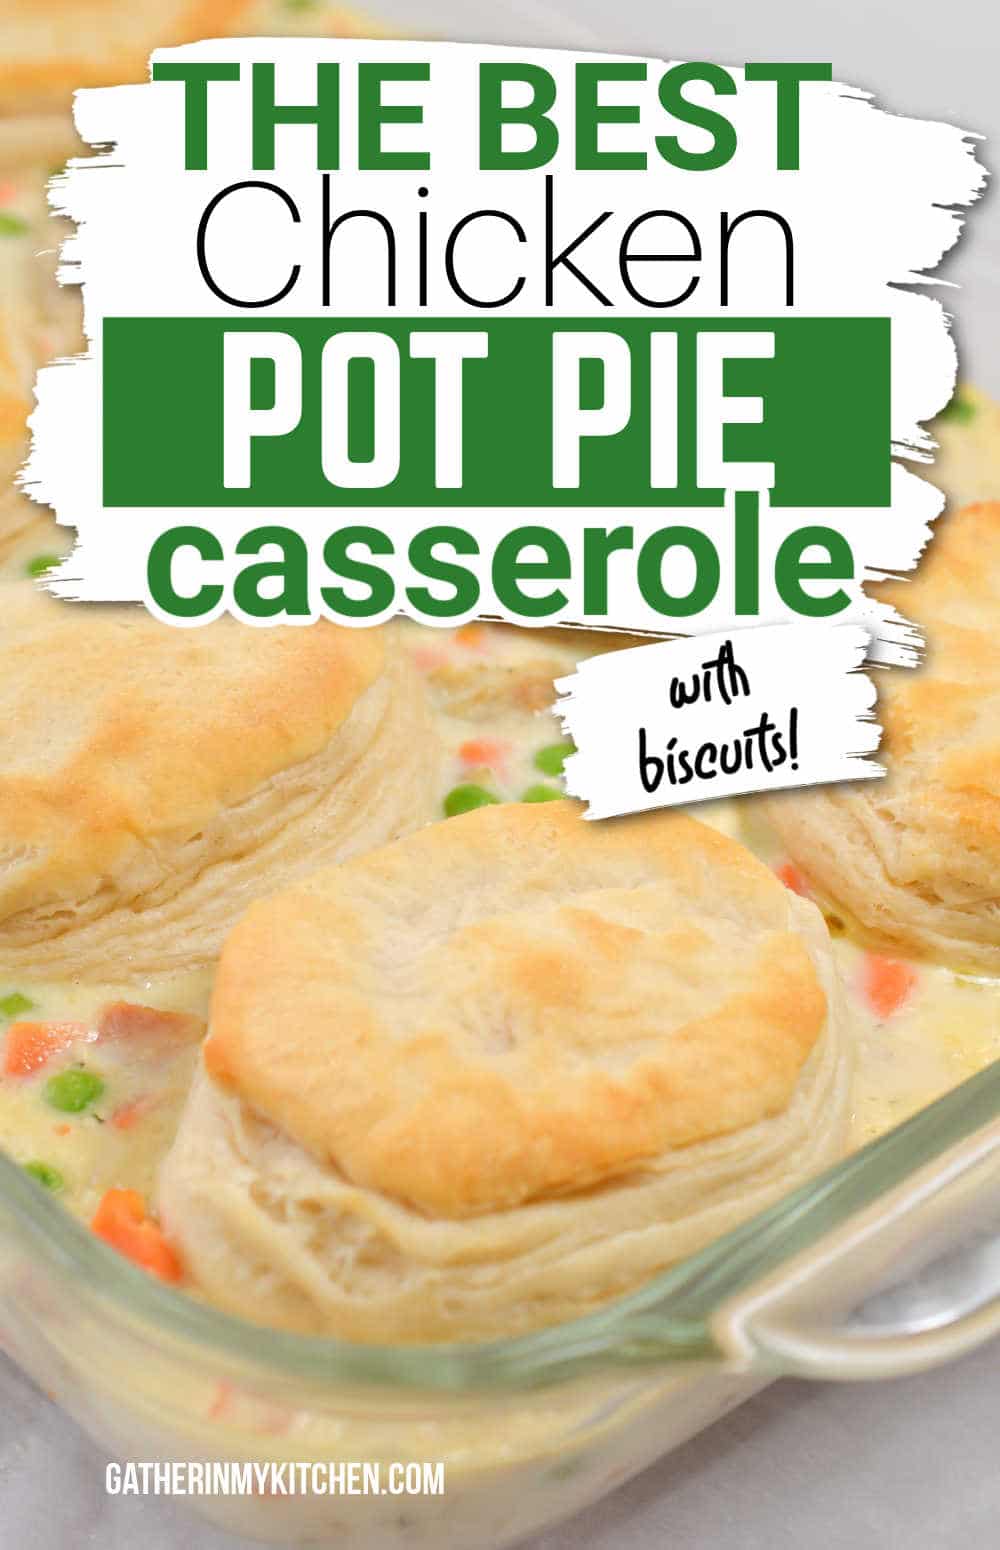 Pin image: chicken pot pie casserole with biscuits in casserole dish with the words "The Best Chicken Pot Pie Casserole With Biscuits" overlaid.